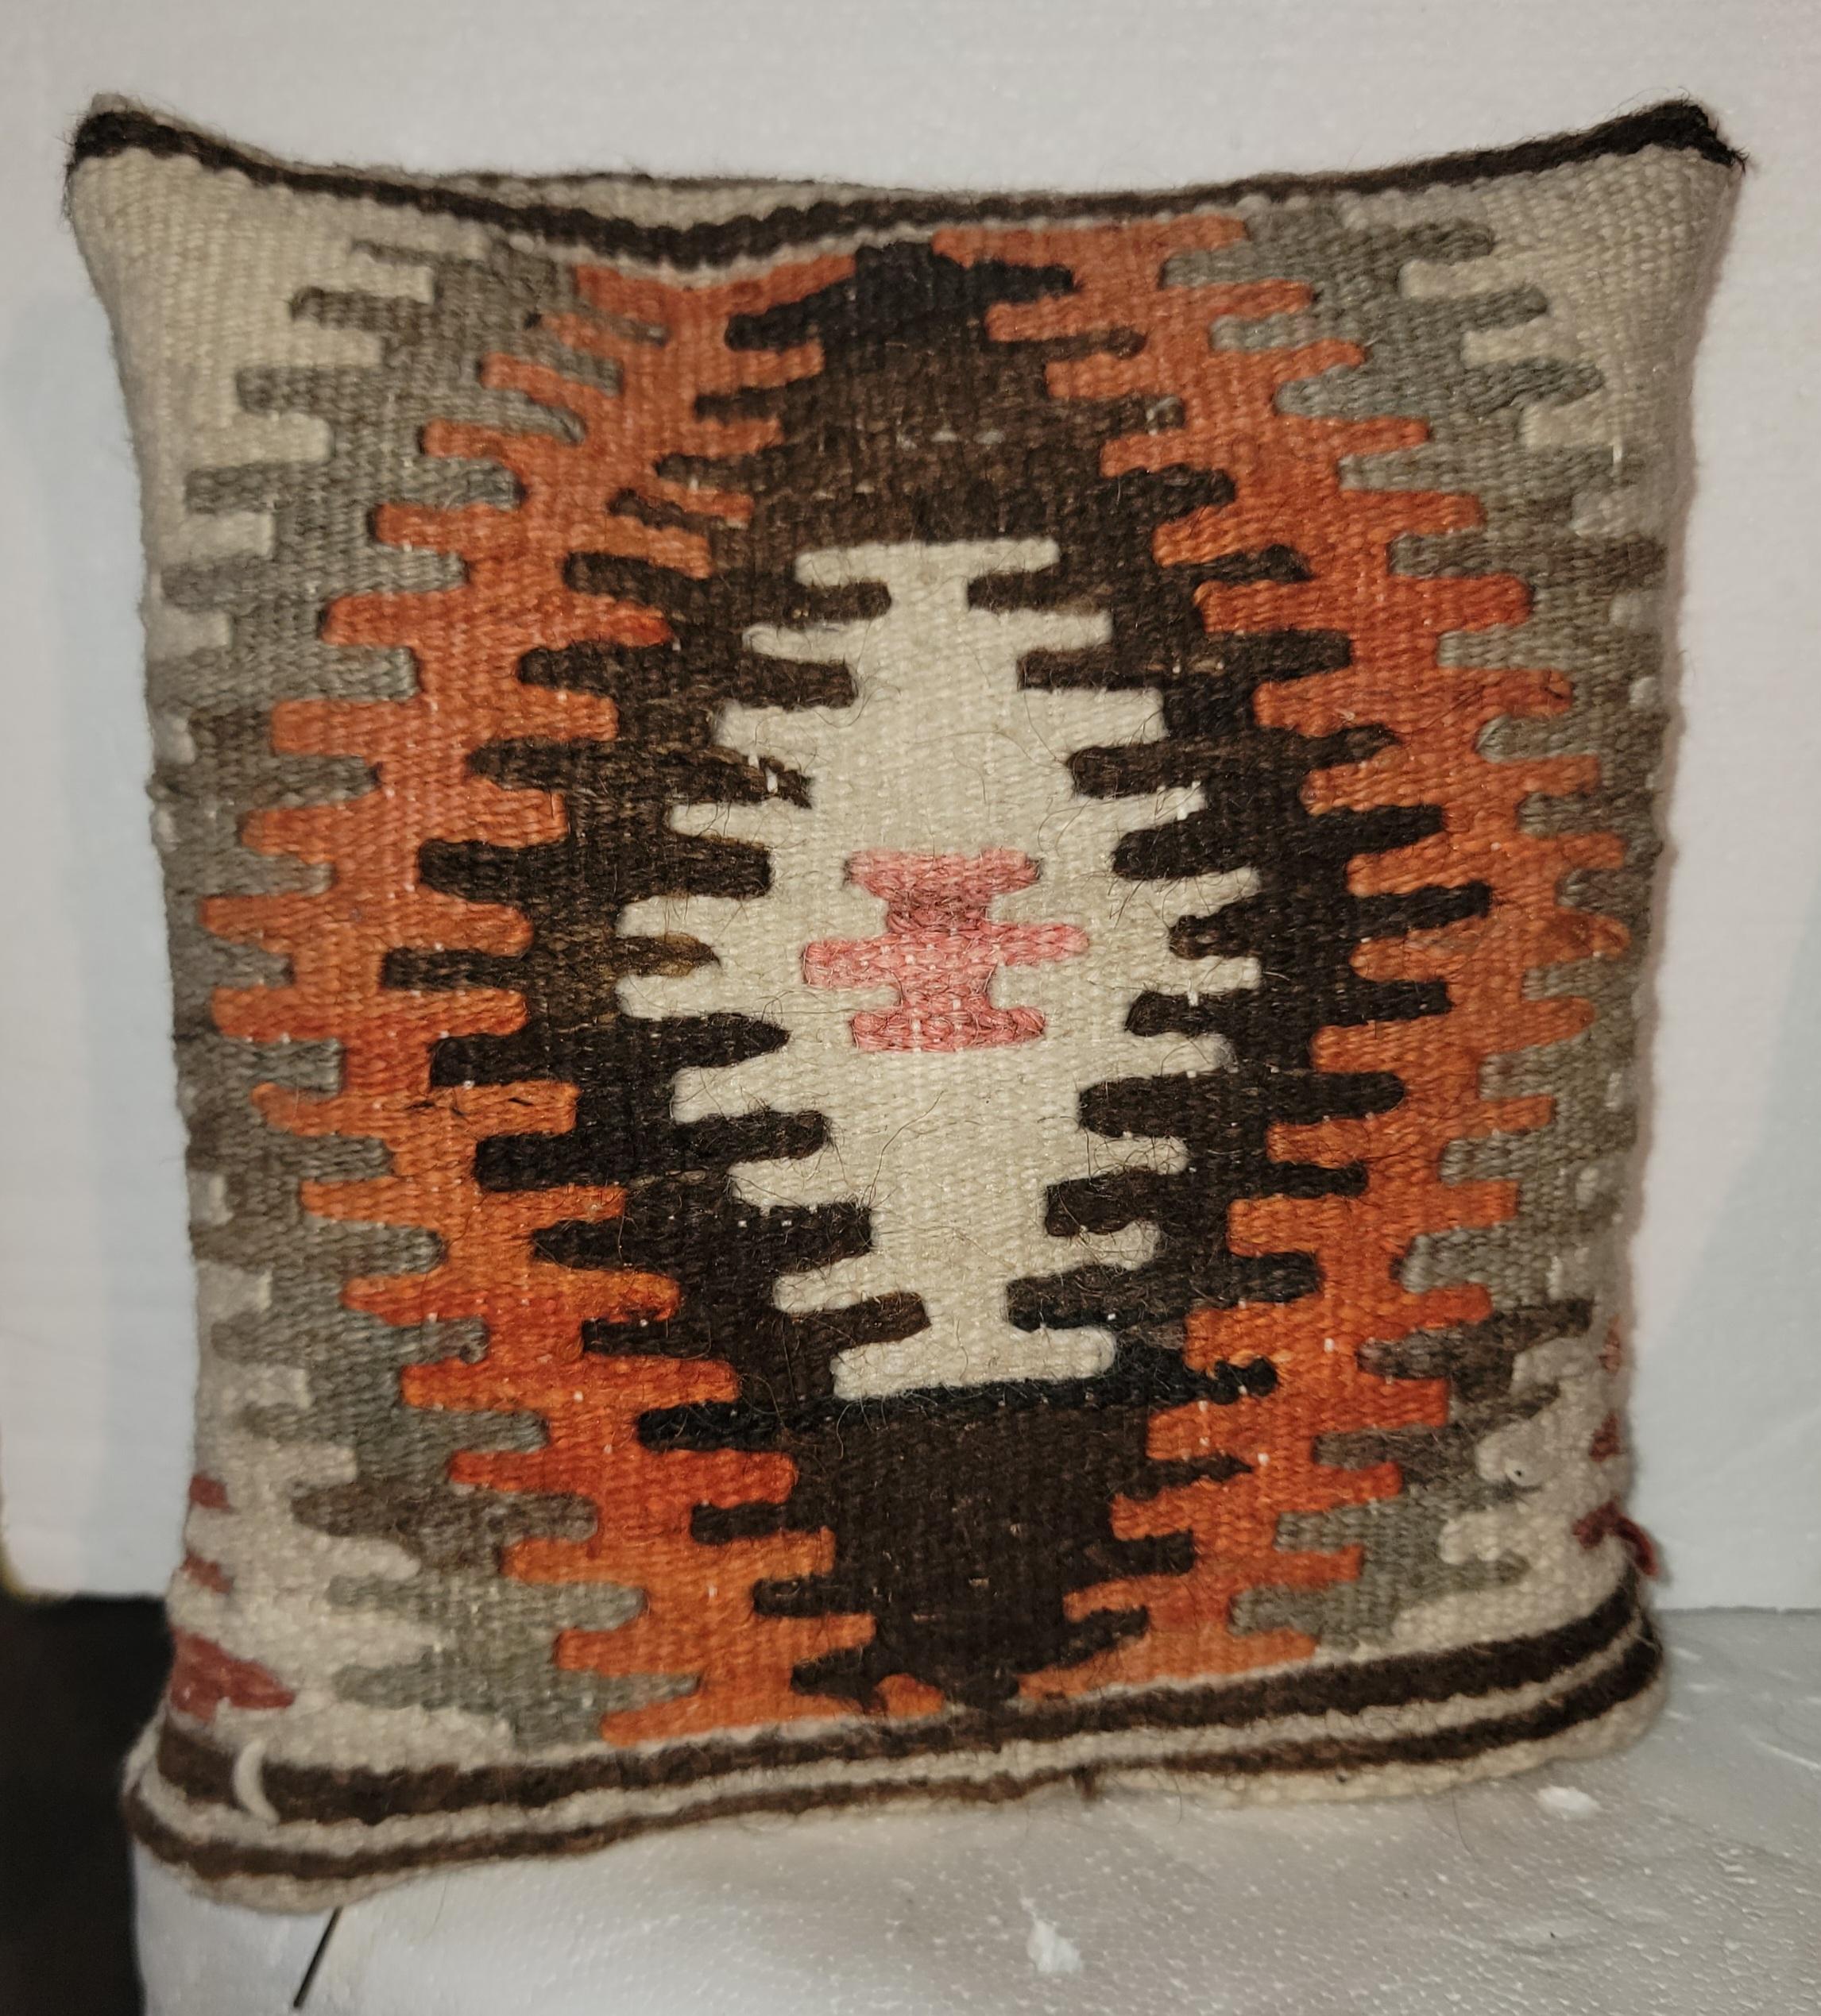 This collection of mini Navajo weaving children's or sampler weaving pillows.The further most right pillow is a double sided pillow. The back of that plllow is shown as the last image with beige wool and brown stripe.
Sold as a collection.
Pillows